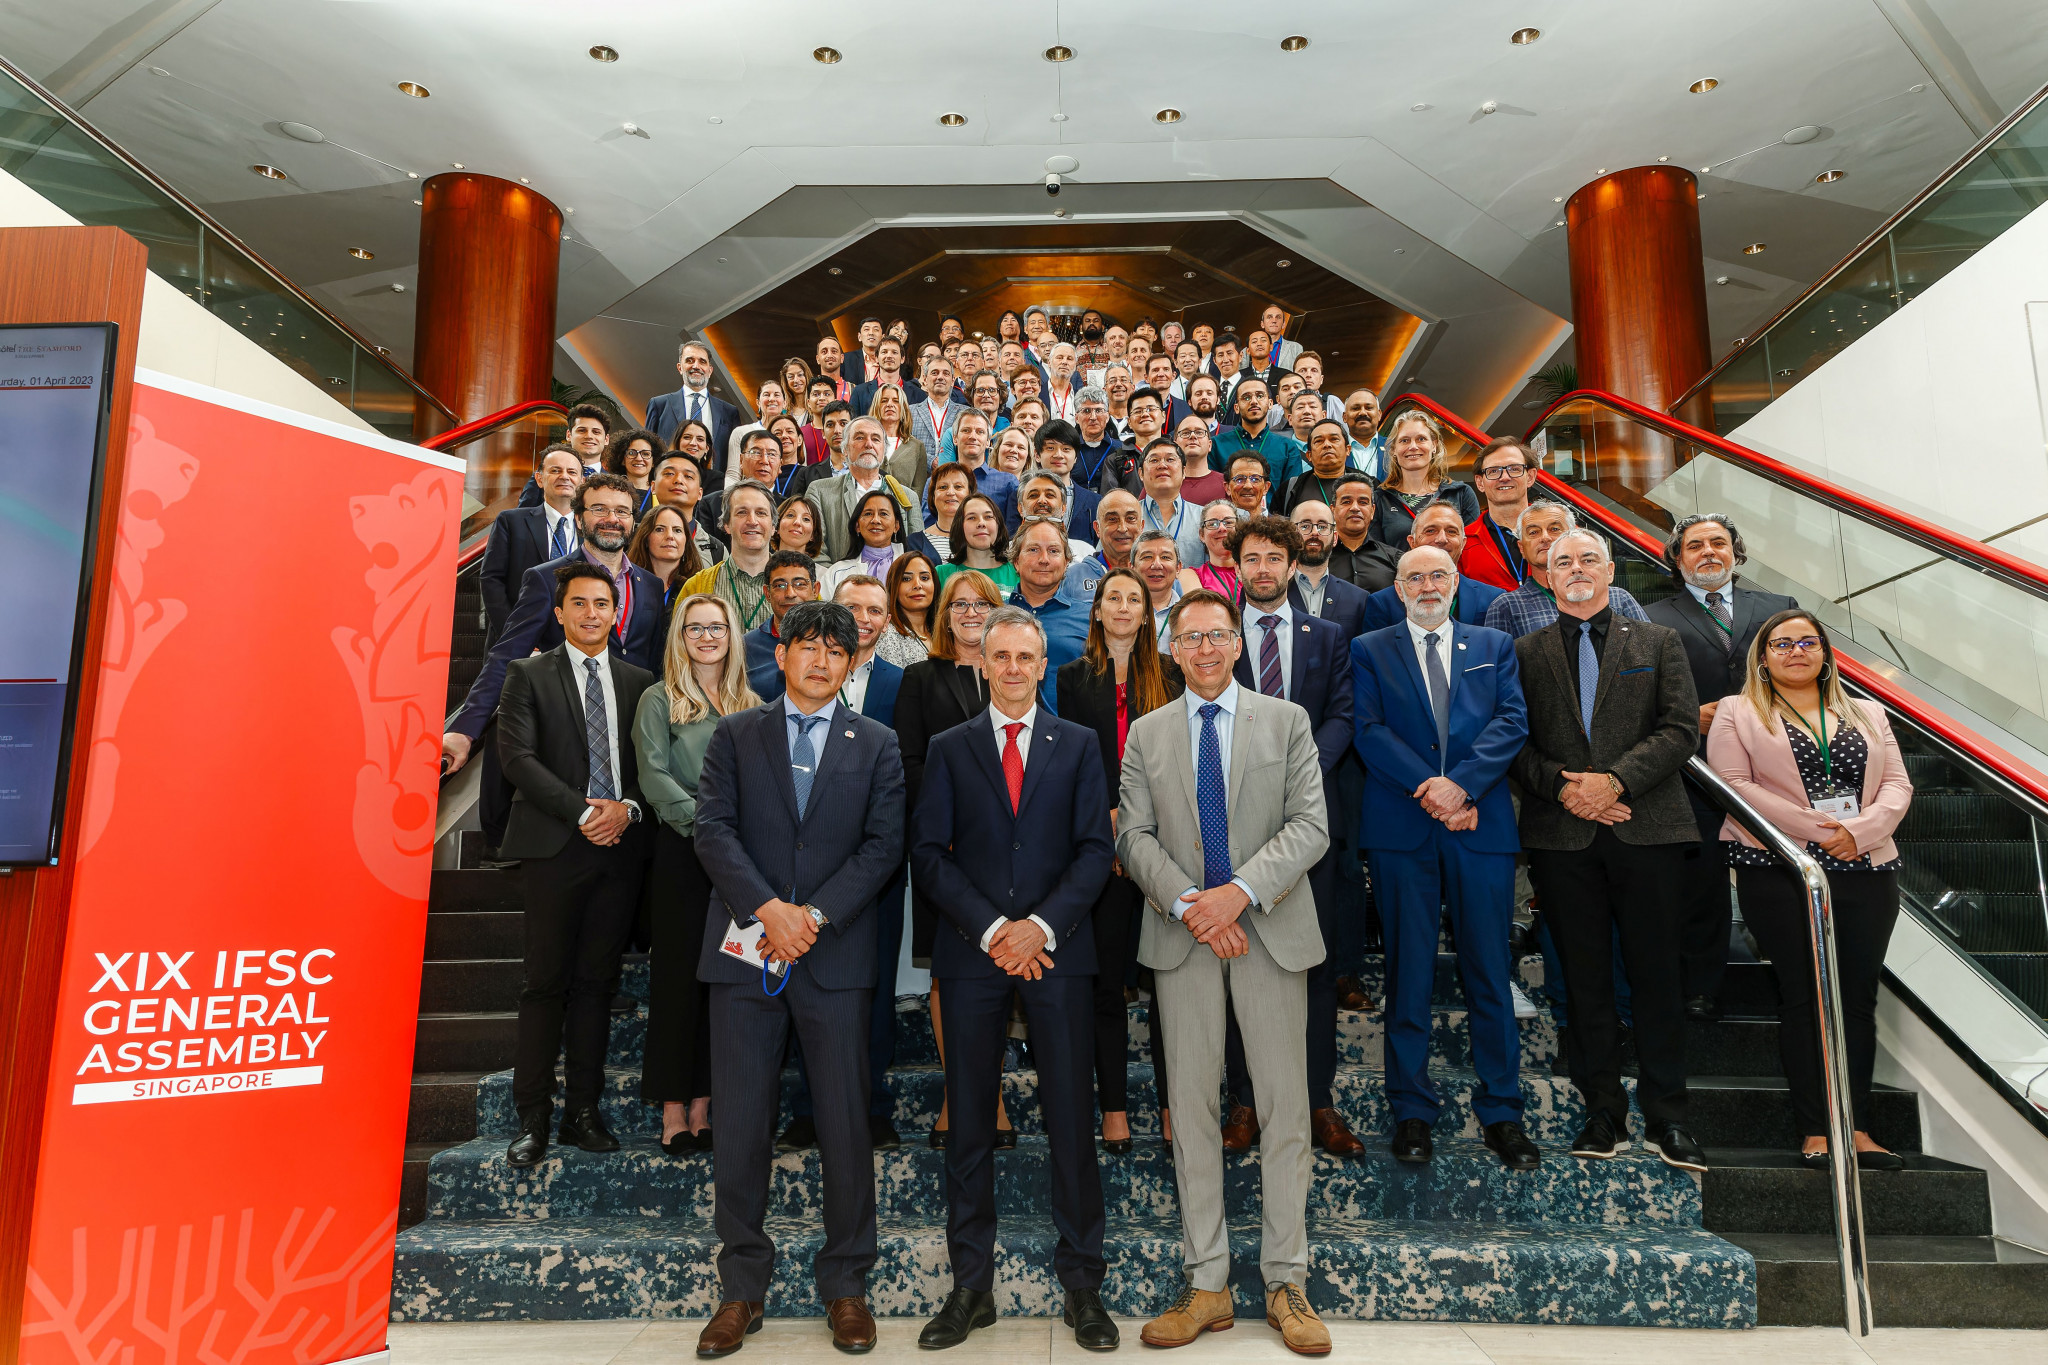 The question of readmitting Russia and Belarus was discussed at the International Federation of Sport Climbing General Assembly but the ban remains in place ©IFSC